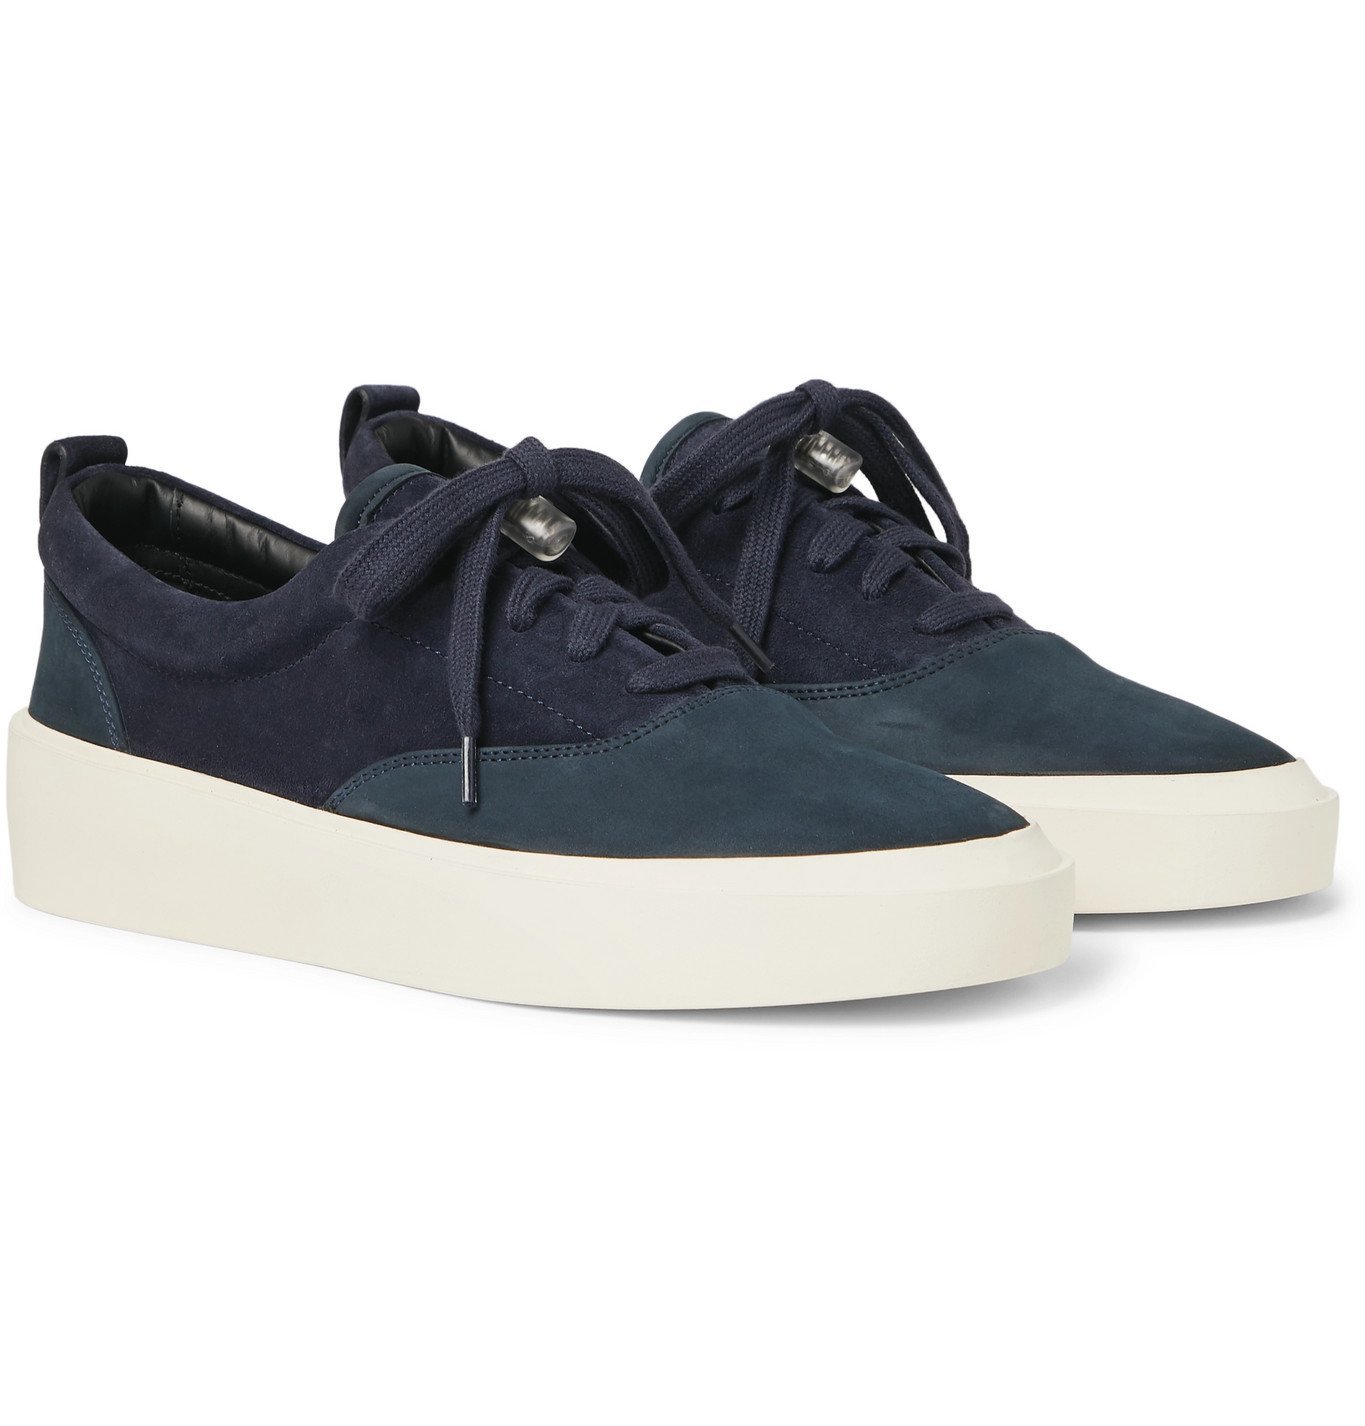 Fear of God - 101 Suede and Nubuck Sneakers - Blue Fear Of God